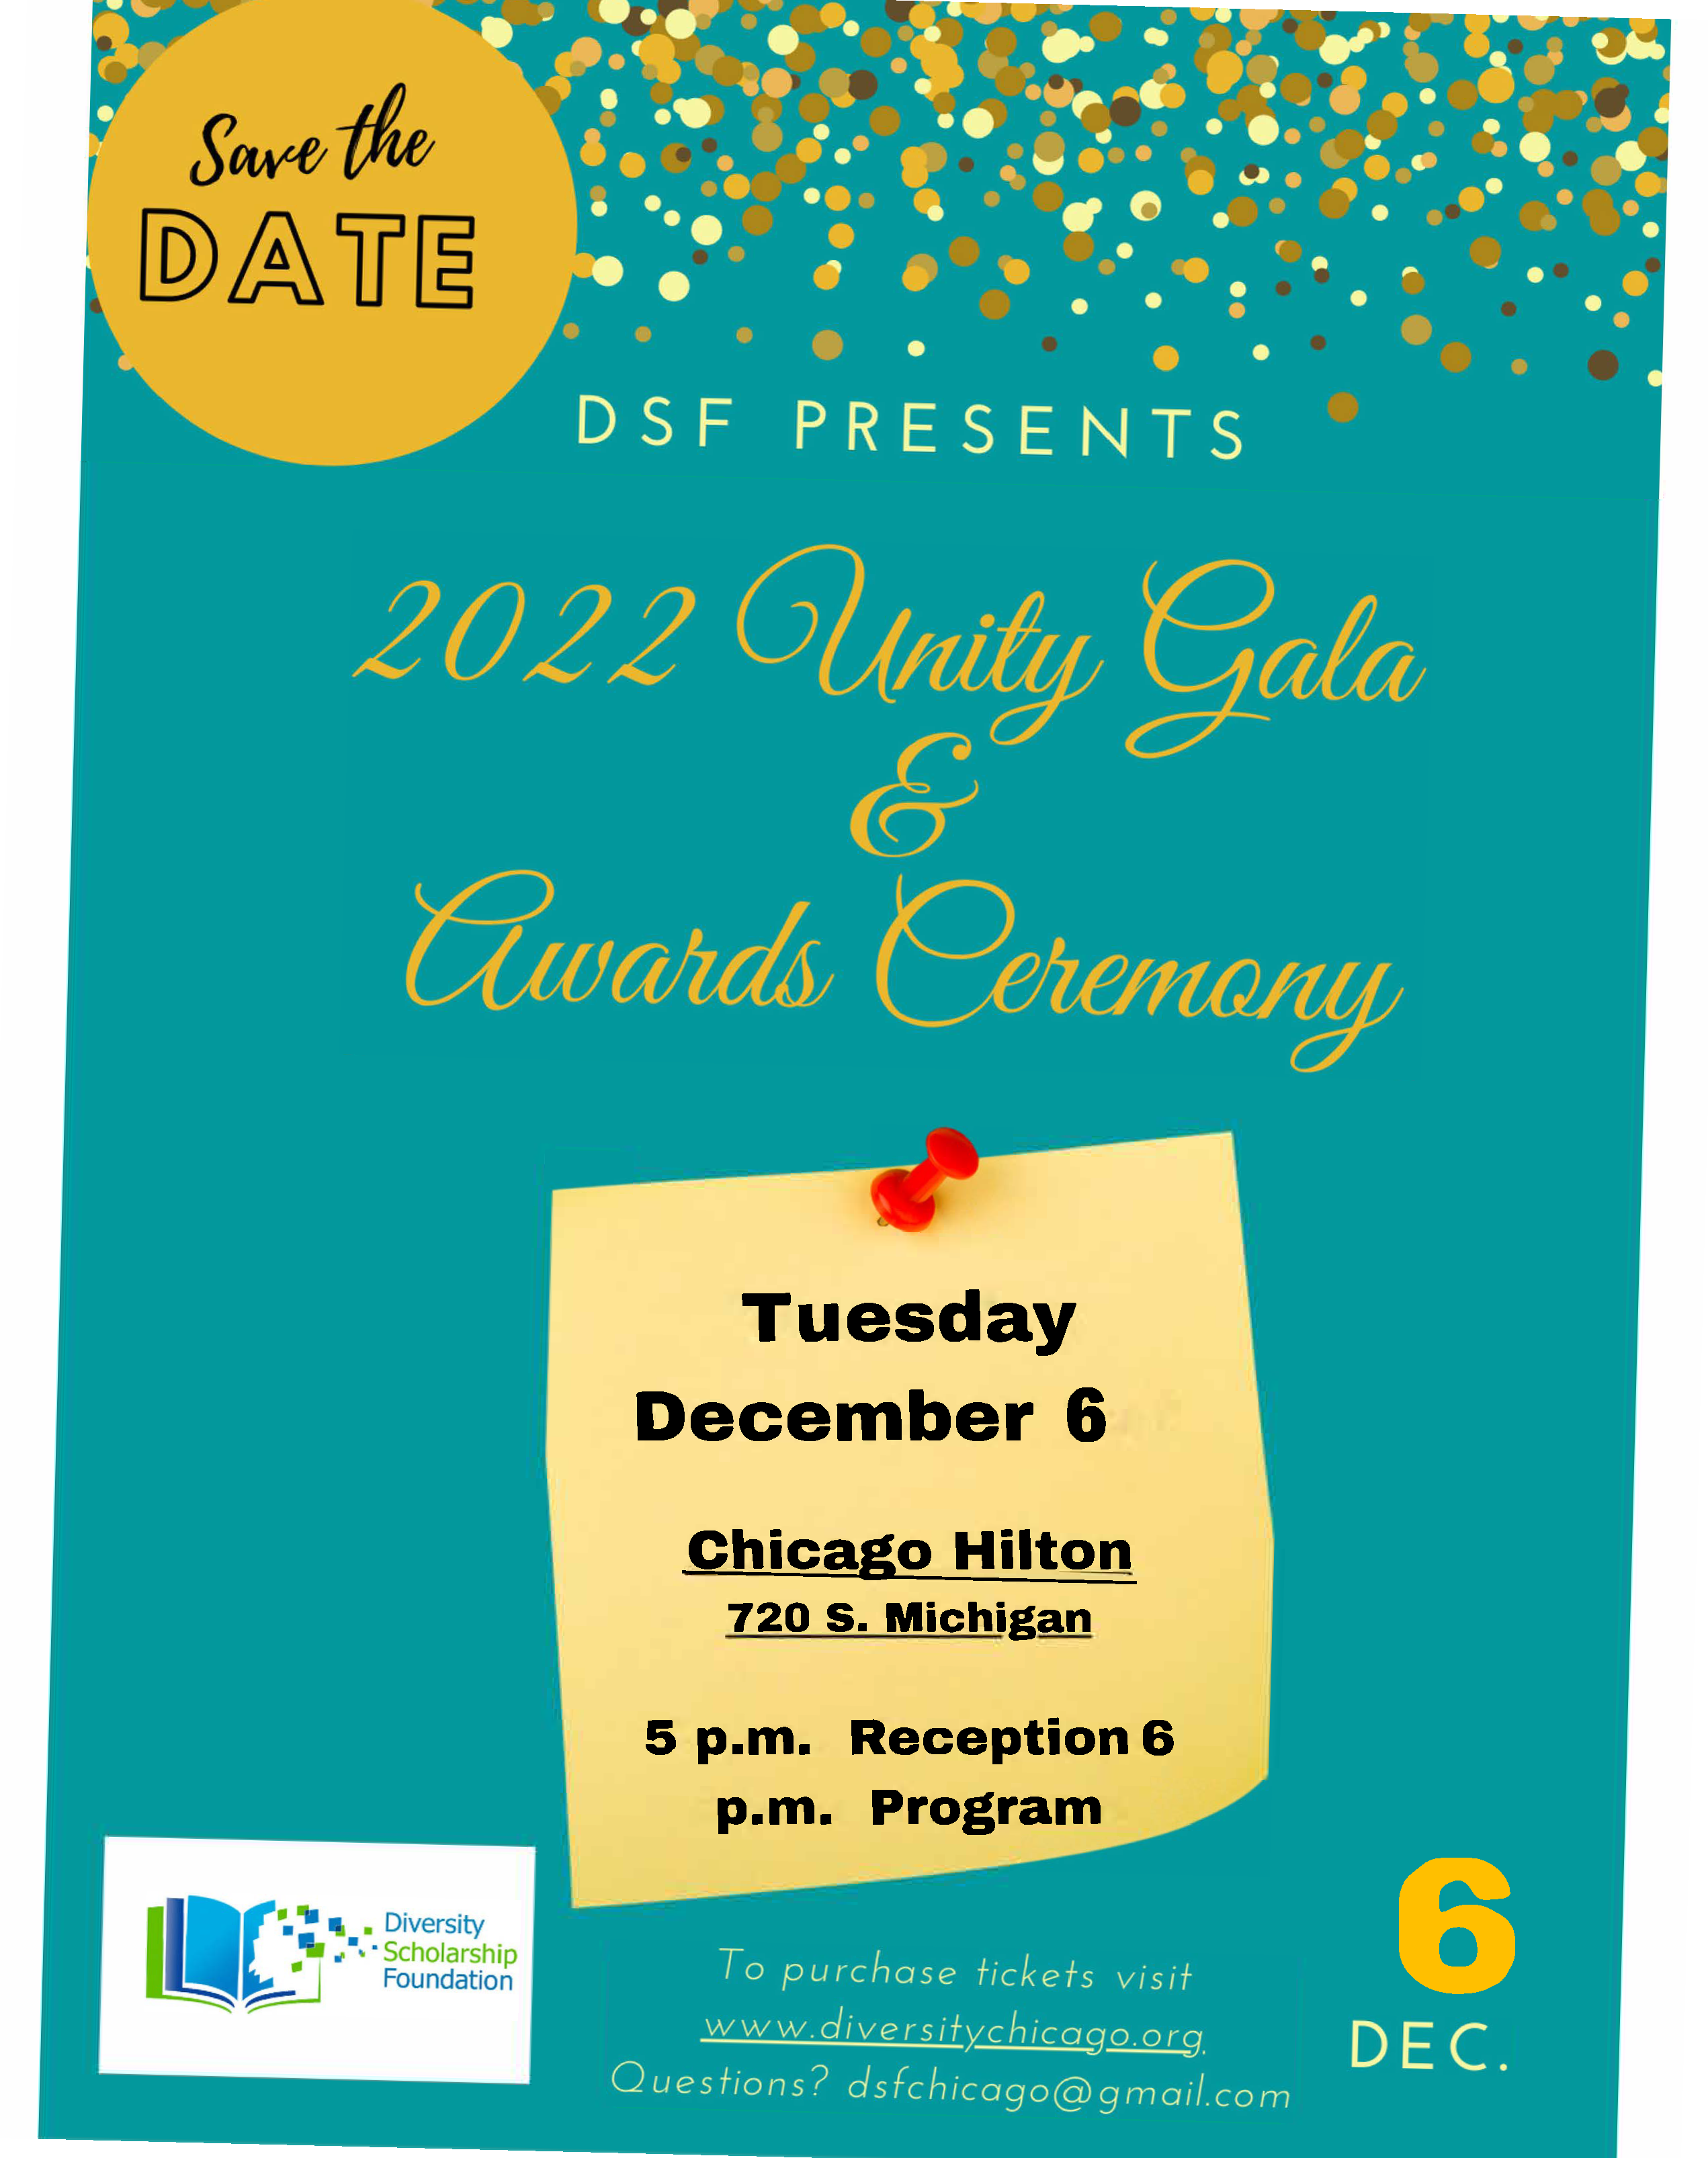 Save the Date for 2022 Unity Gala